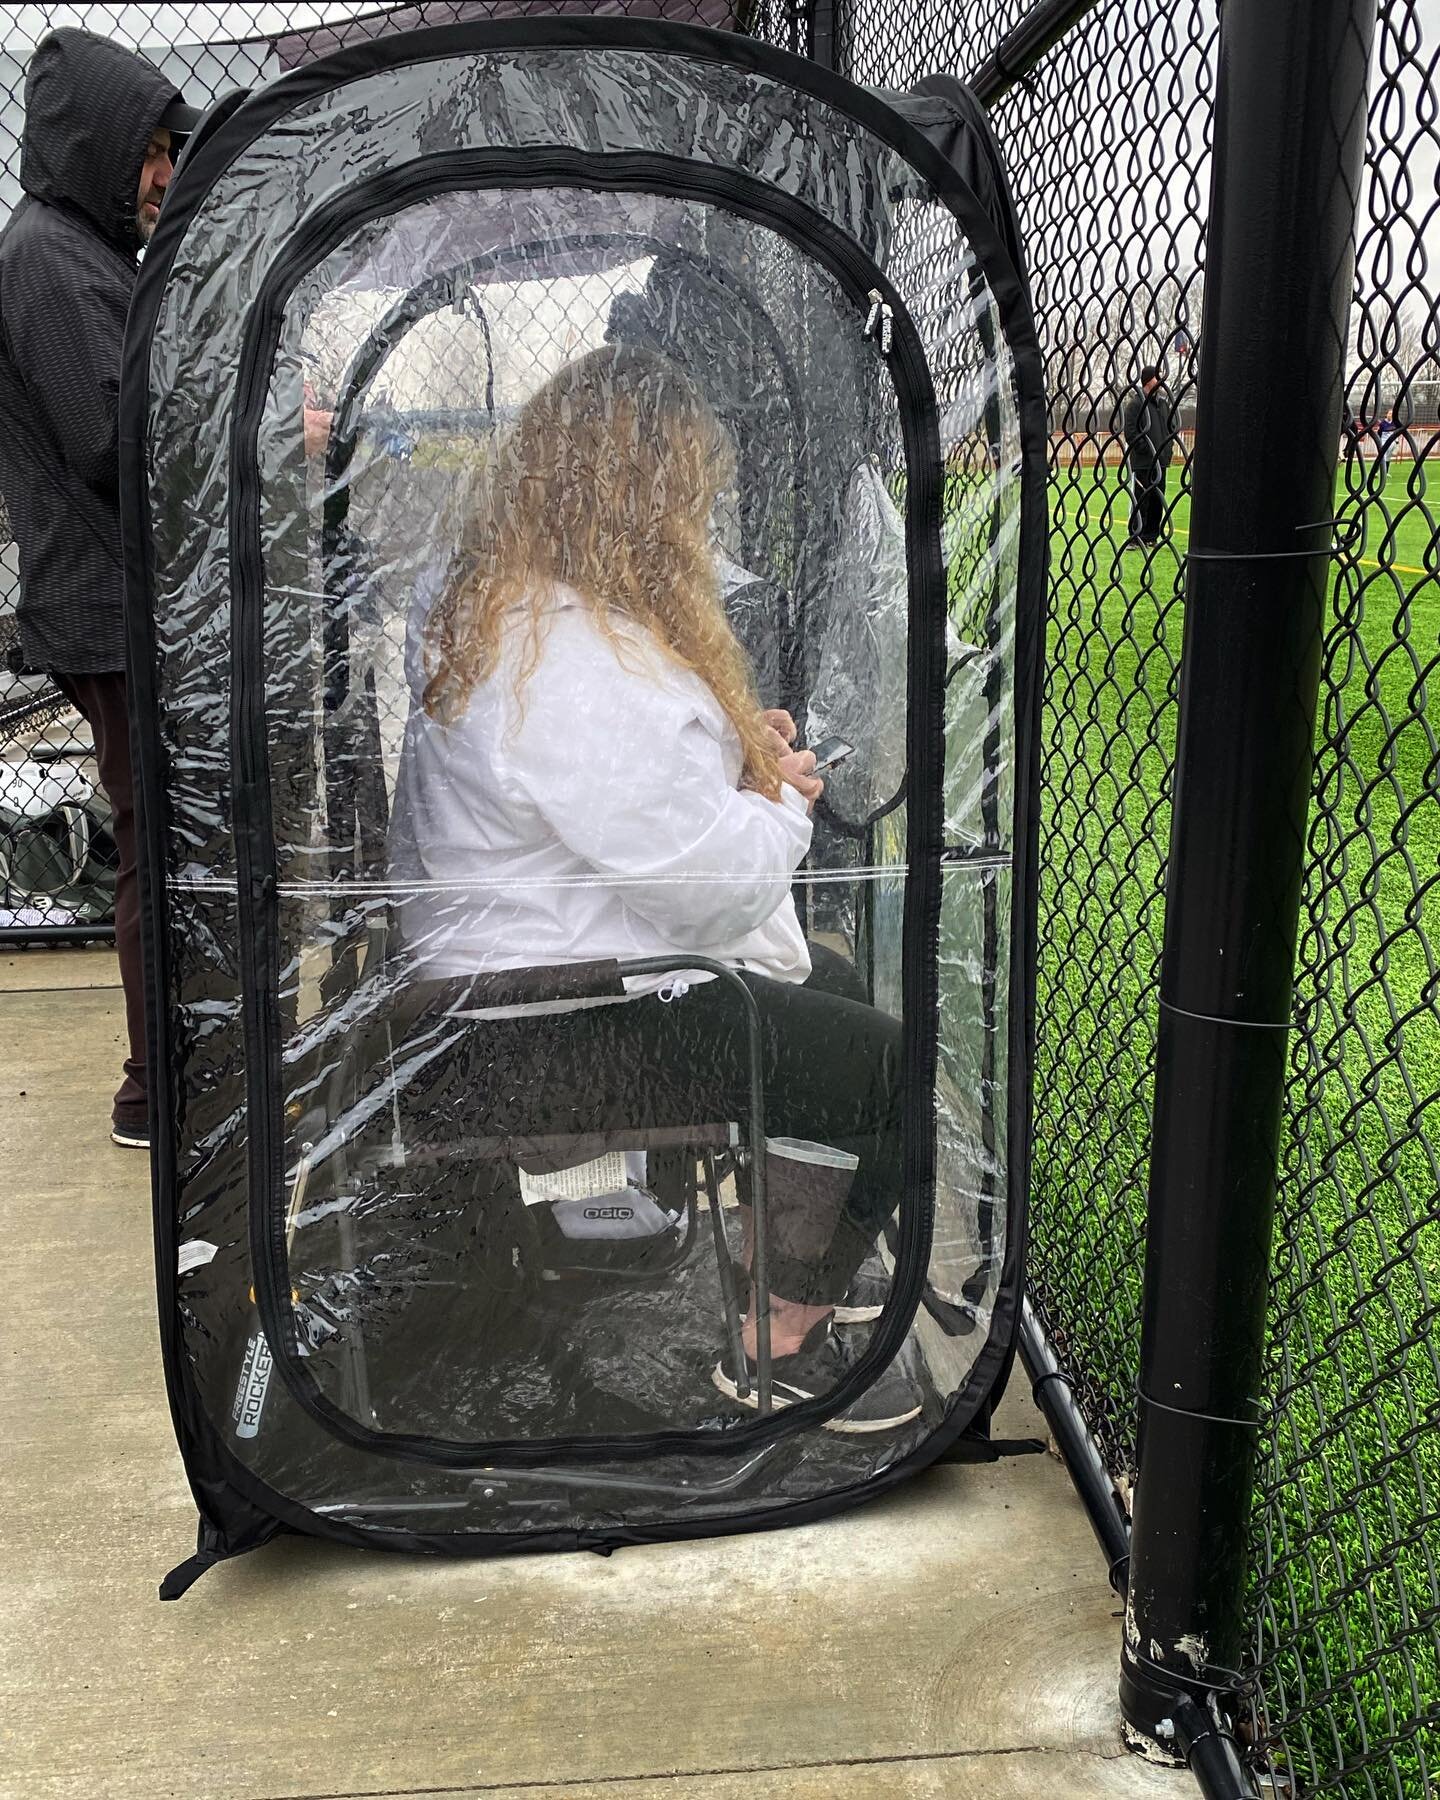 Mom fan at daughter&rsquo;s softball game. Brilliant. No wind, no rain, a little warm(er), and you don&rsquo;t have to talk to anyone.